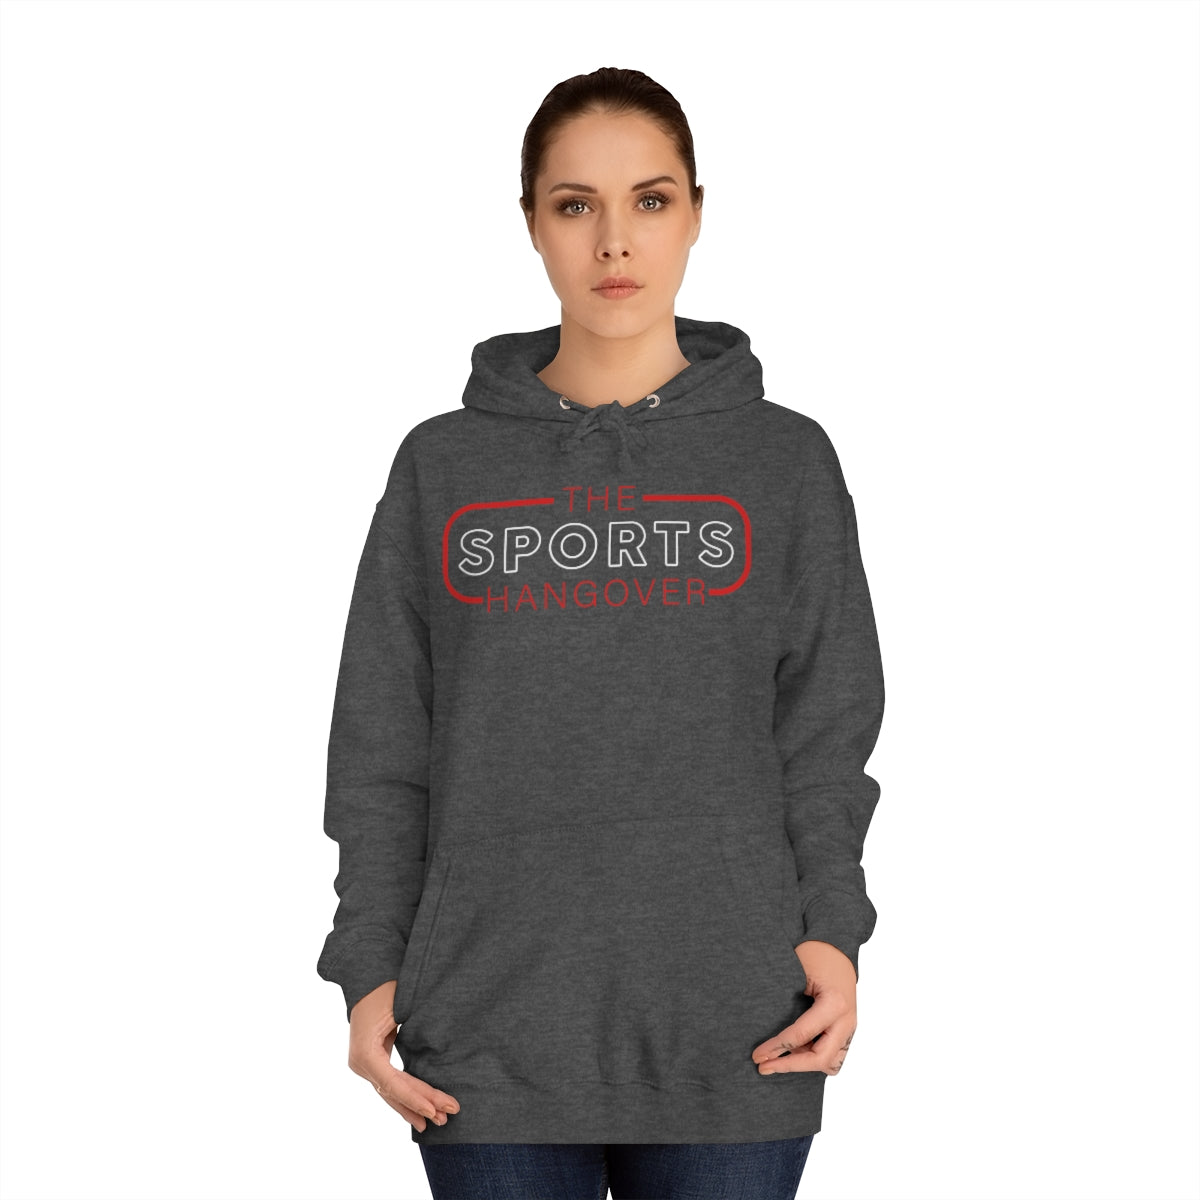 The Sports Hangover Hoodie